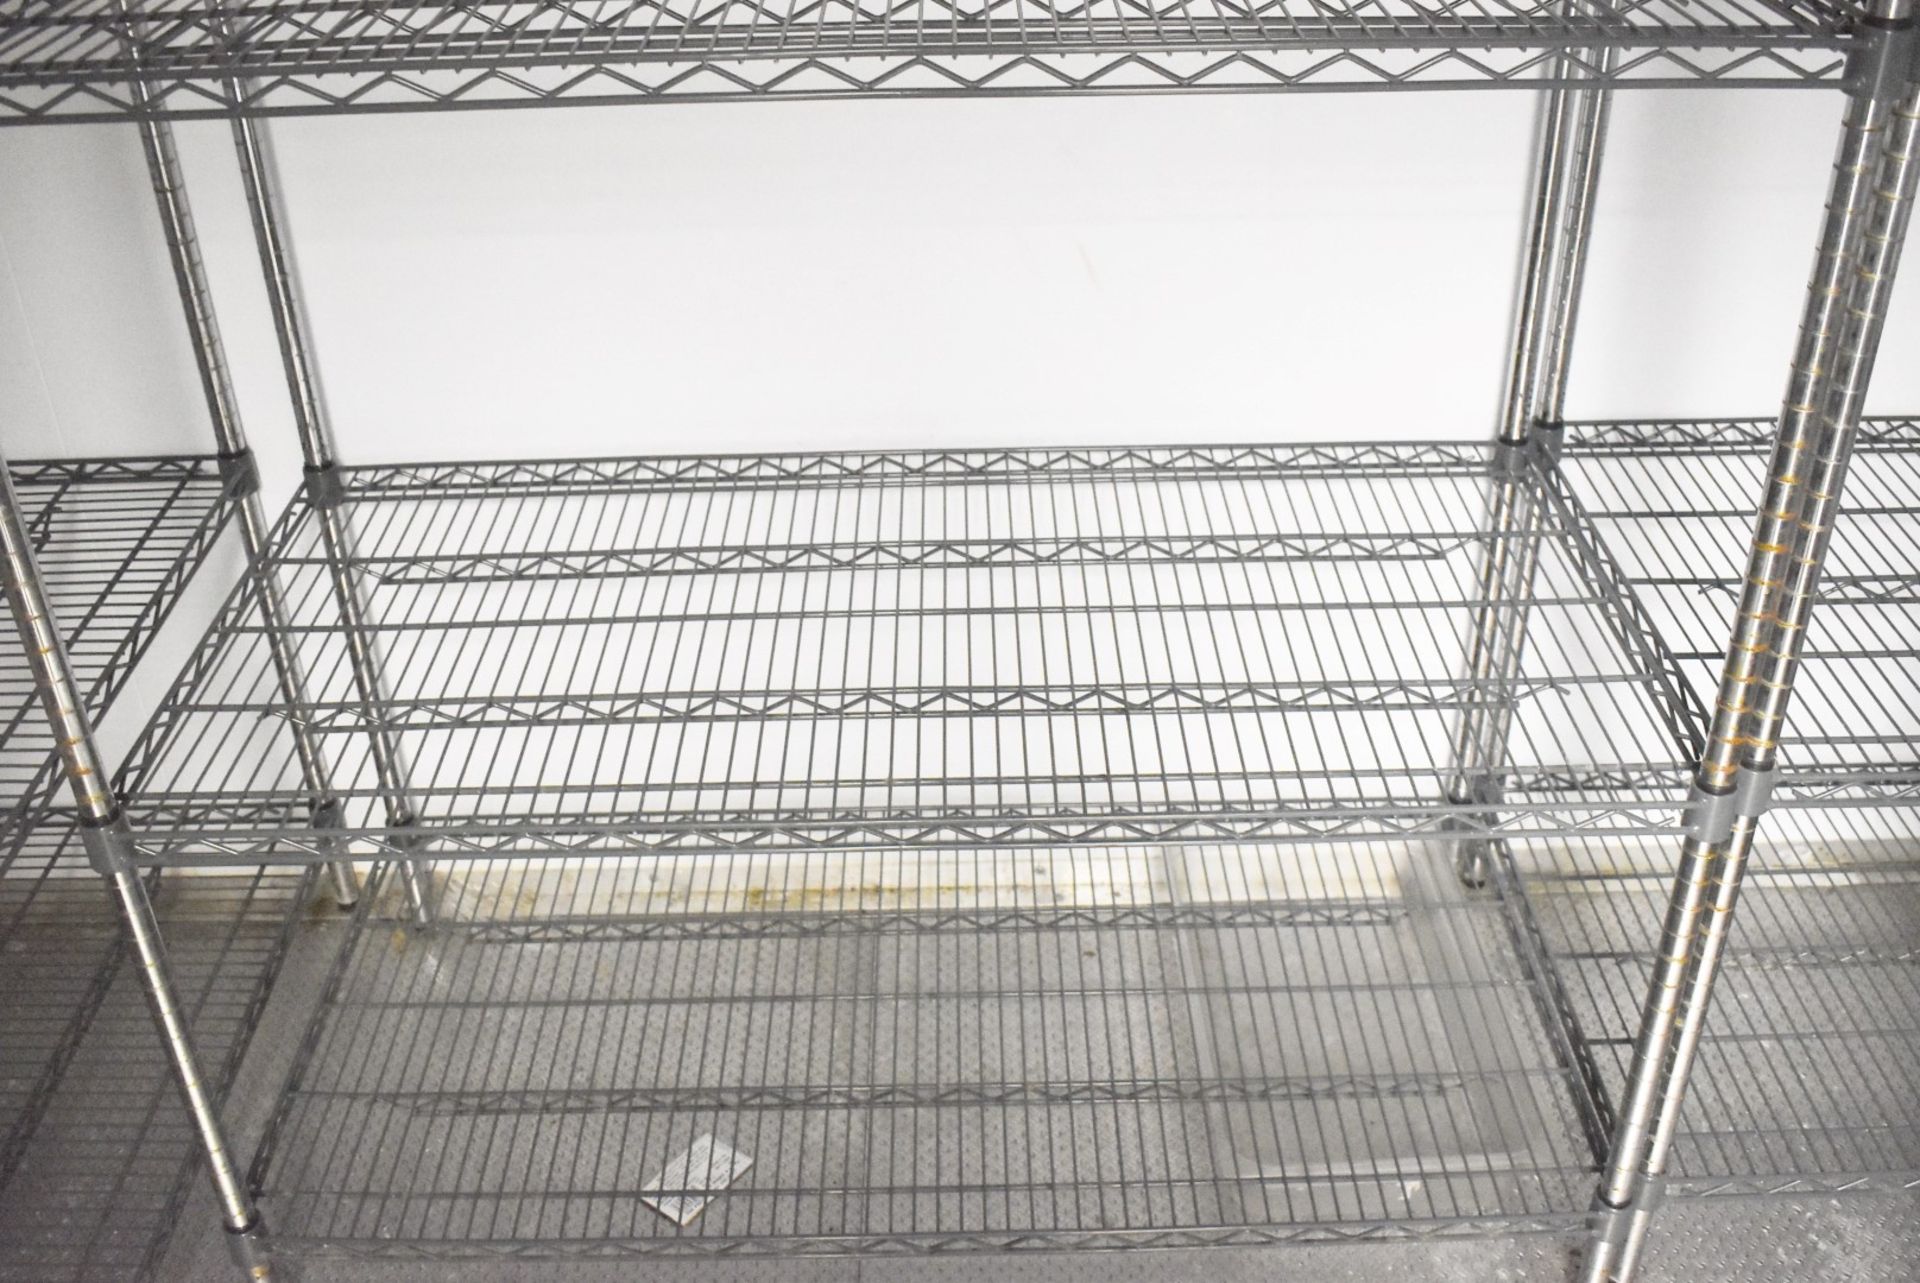 5 x Assorted Cold Room Wire Storage Shelf Units With Coated Shelves - H168 x W90-124 x D60 cms - Image 6 of 9